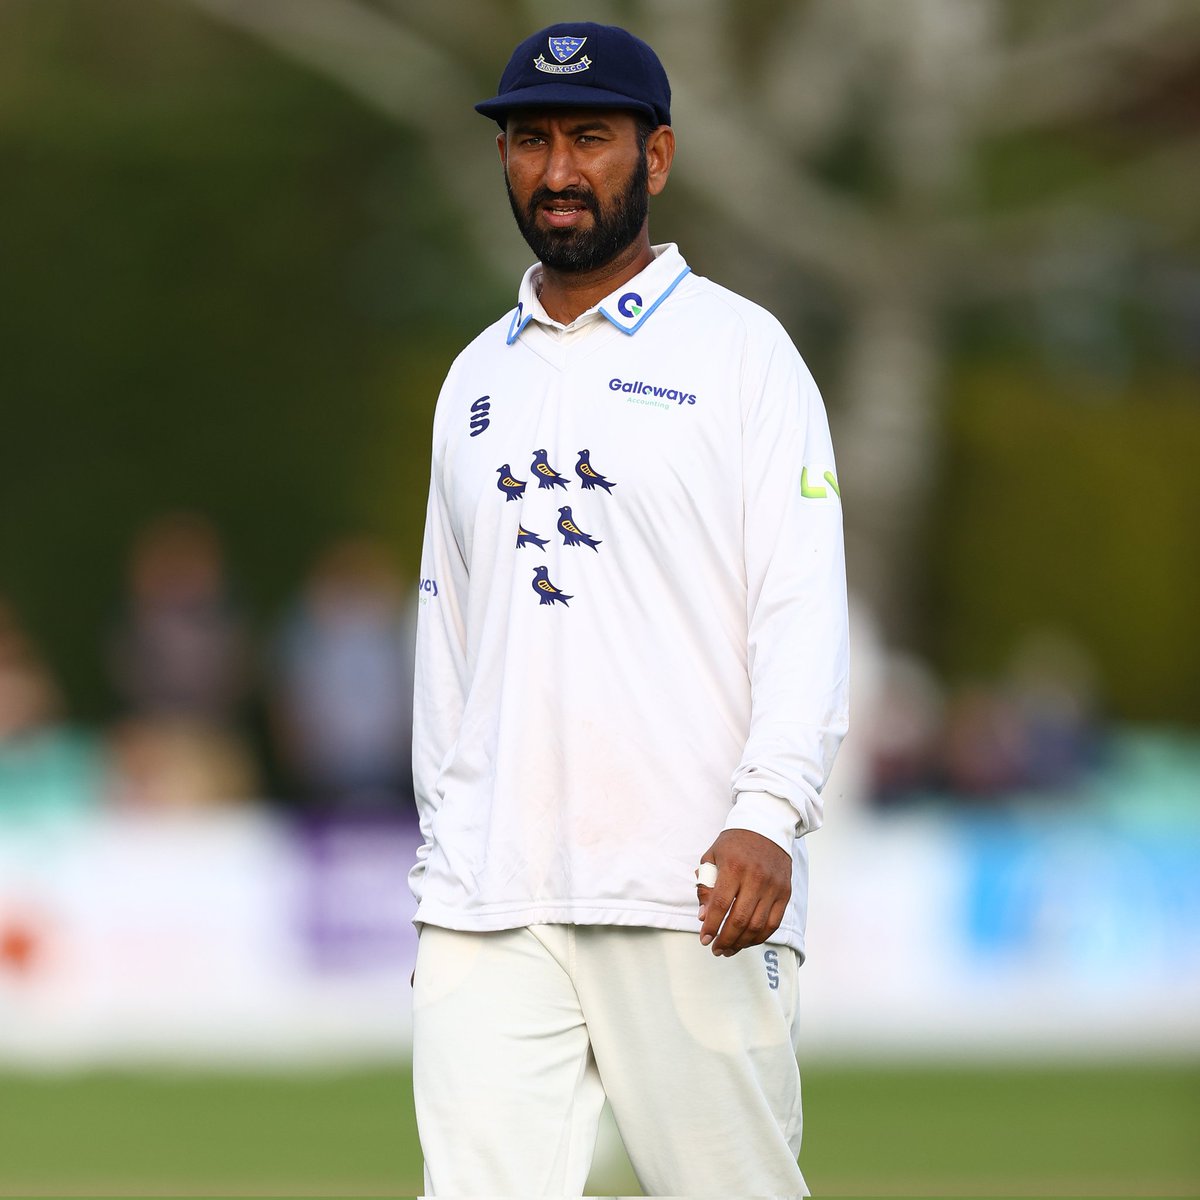 🚨 Breaking 🚨

Cheteshwar Pujara will be the stand in captain of Sussex following Tom Haines injury in the county match today against Middlesex 🏏

#cheteshwarpujara #sussexcricket #CricketTwitter